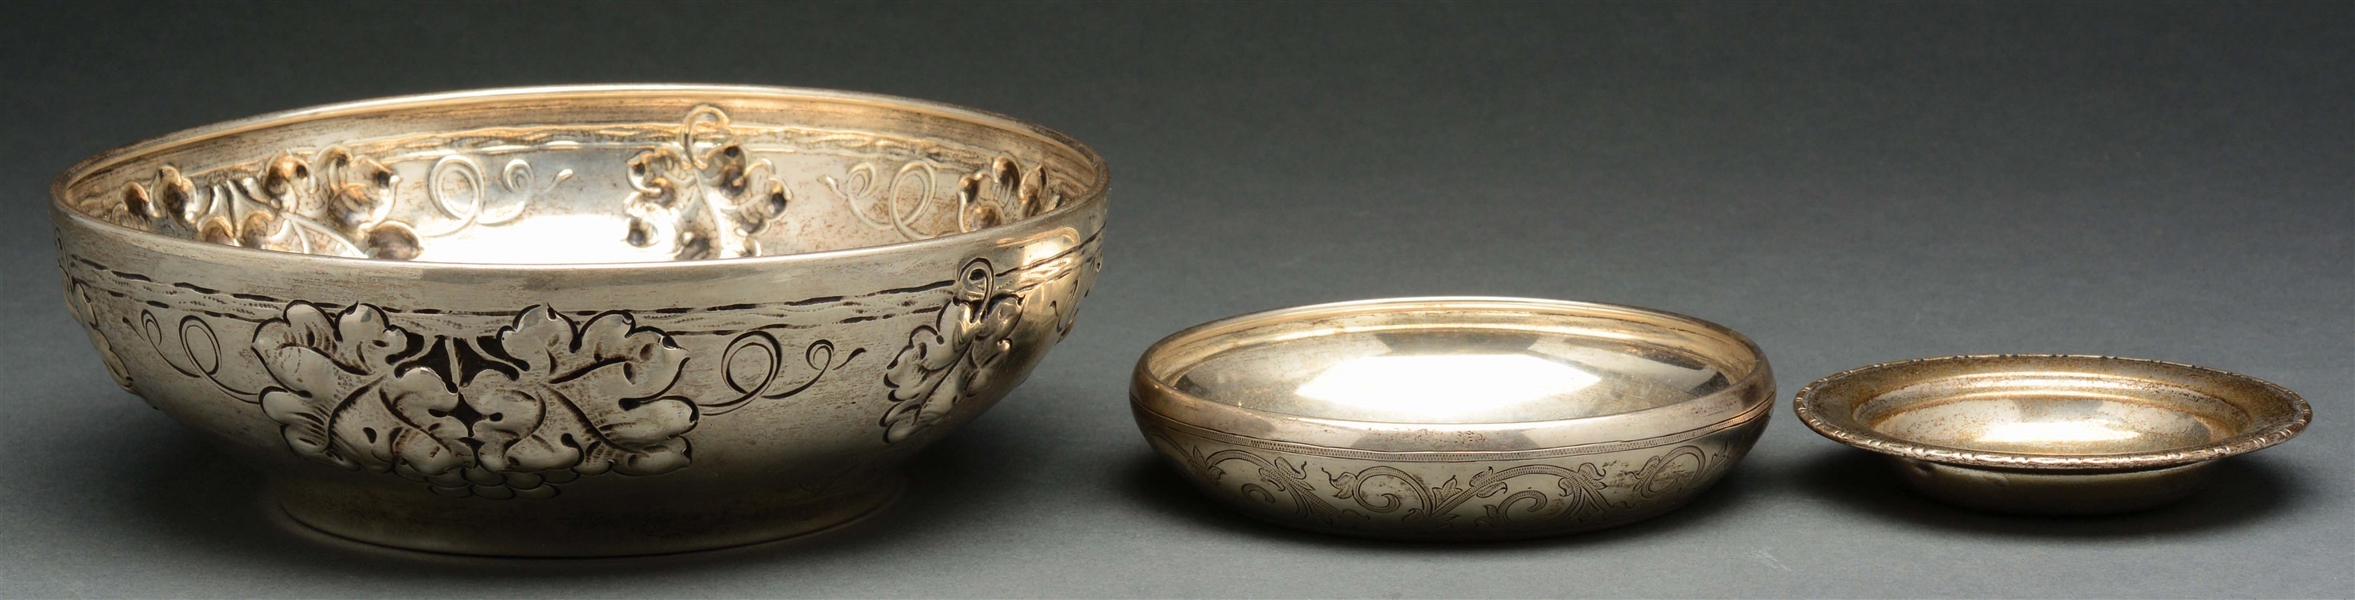 LOT OF 3: NORWEGIAN 830 SILVER BOWLS, ONE WITH REPOUSSE DESIGN.